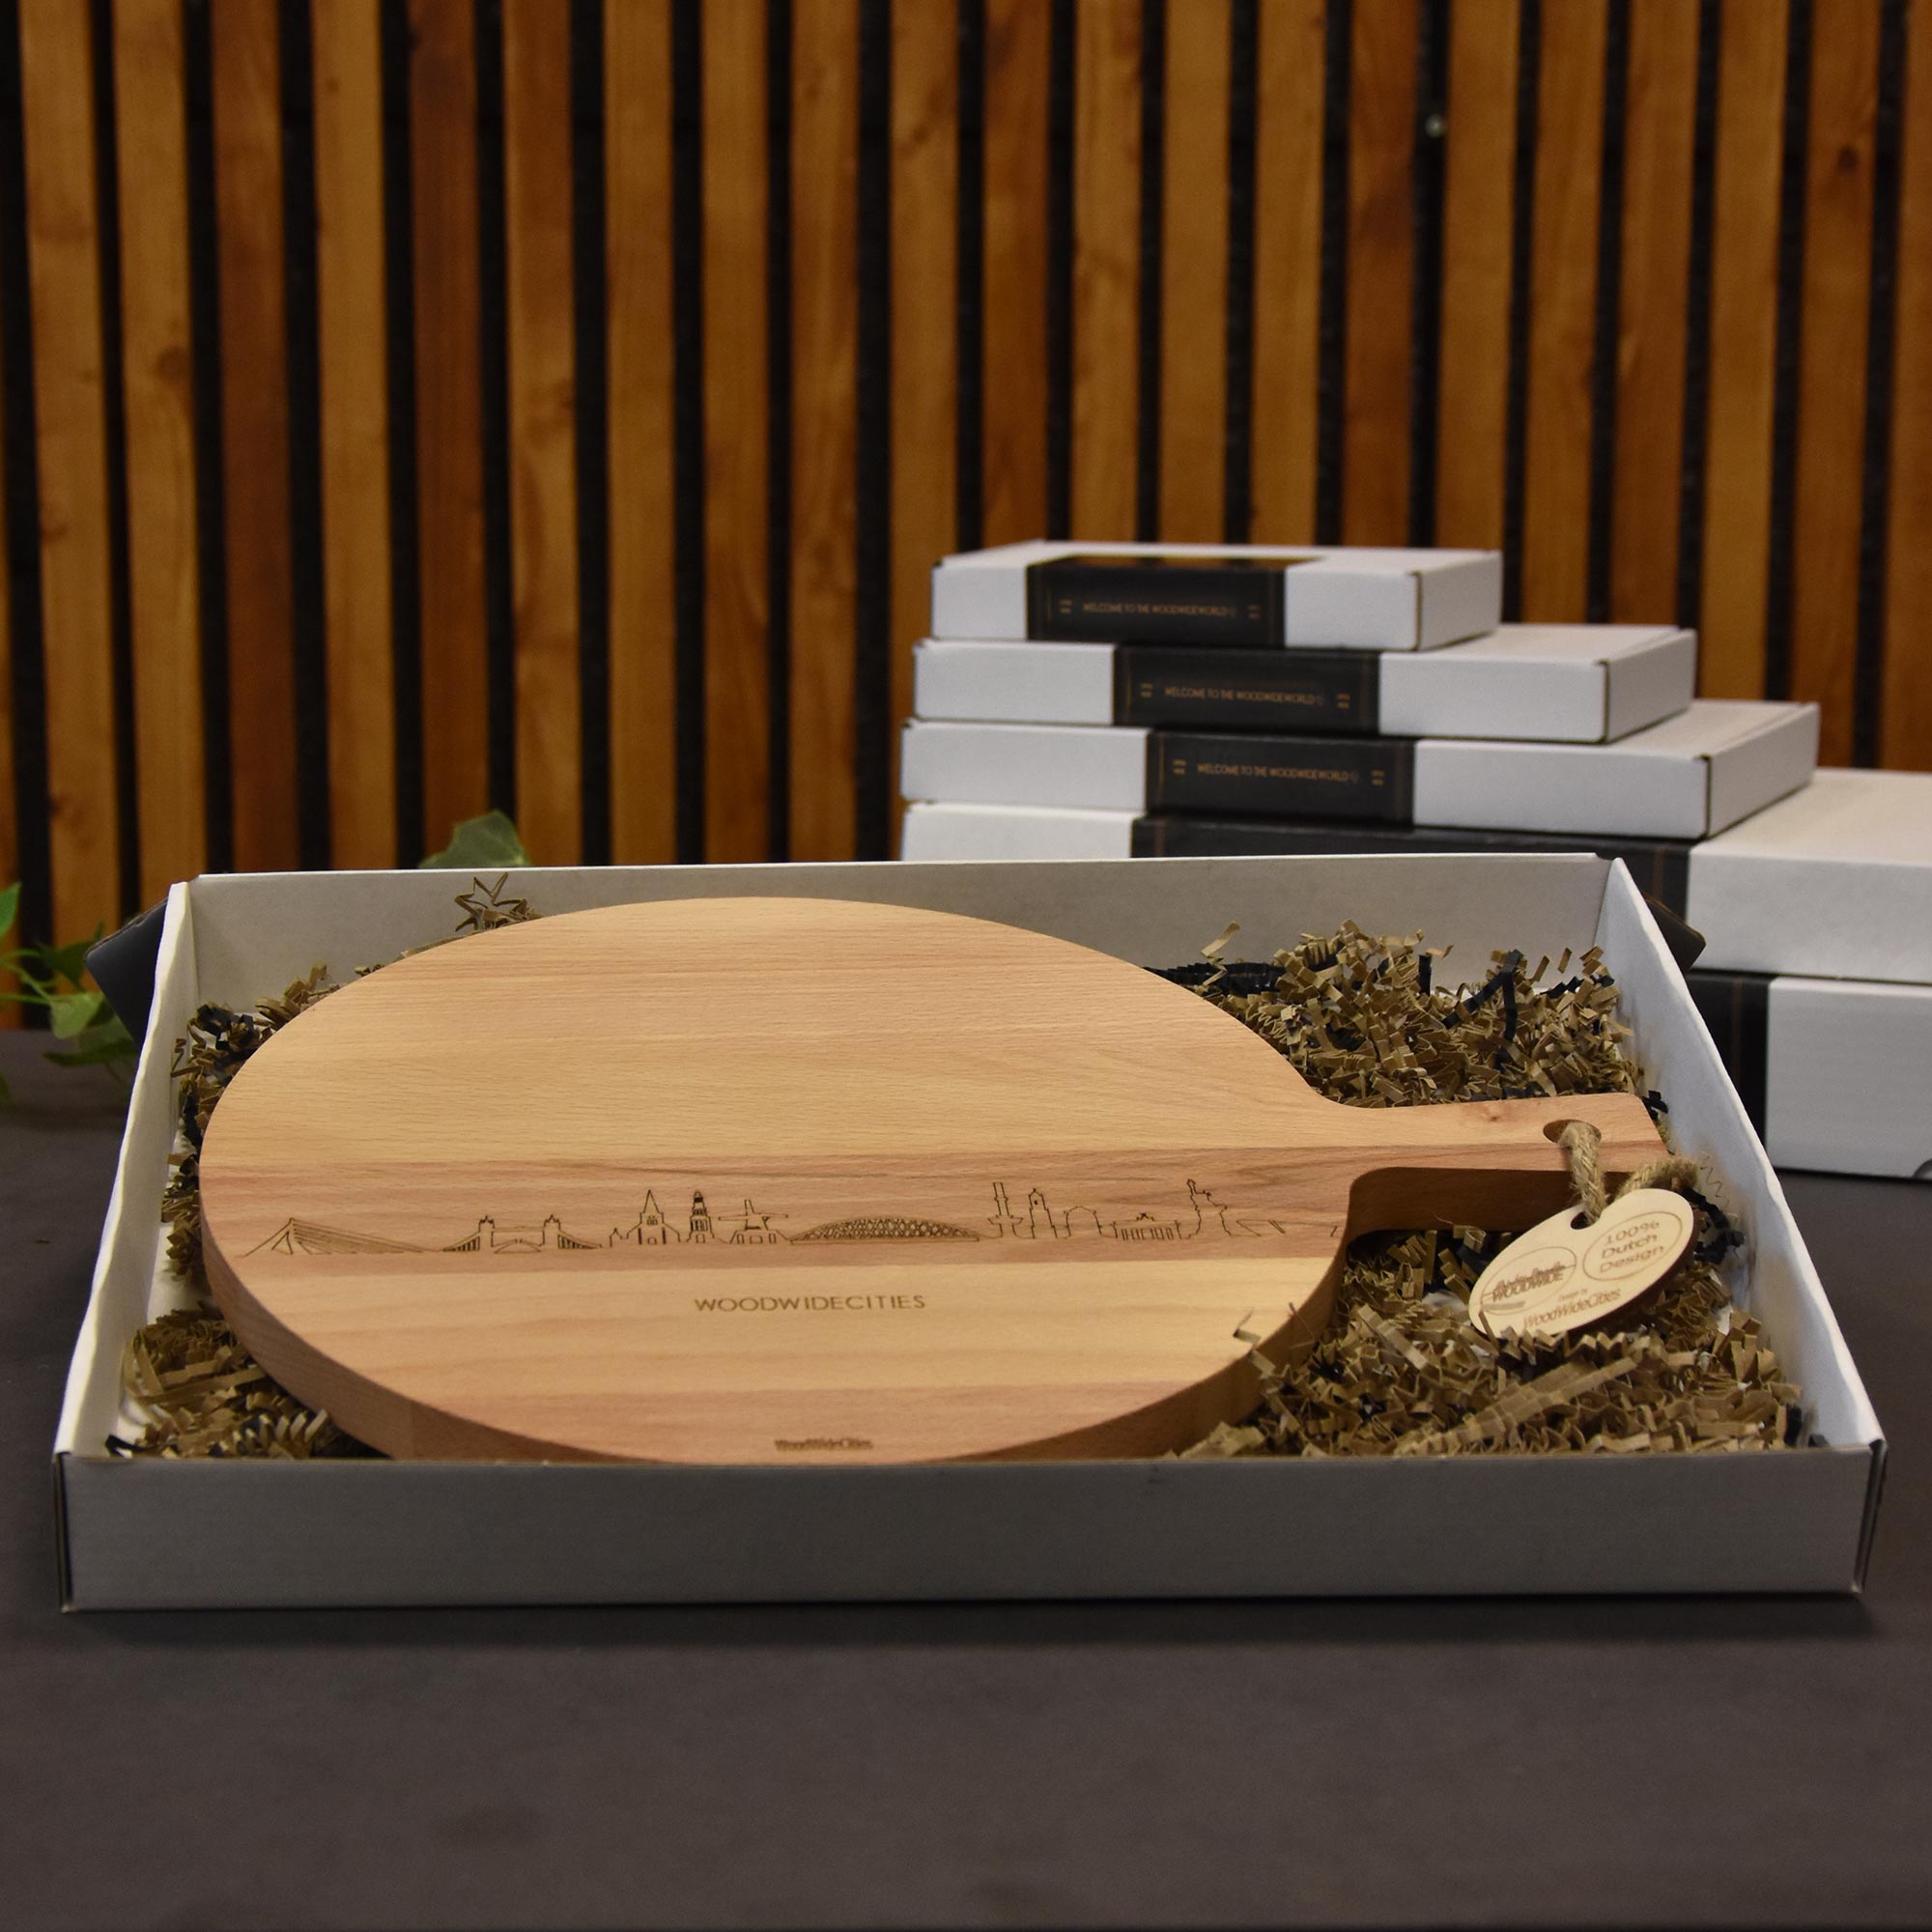 Serveerplank Rond Touwtje Springen (Man) Do What You Can With What You Have Where You Are houten cadeau decoratie relatiegeschenk van WoodWideCities